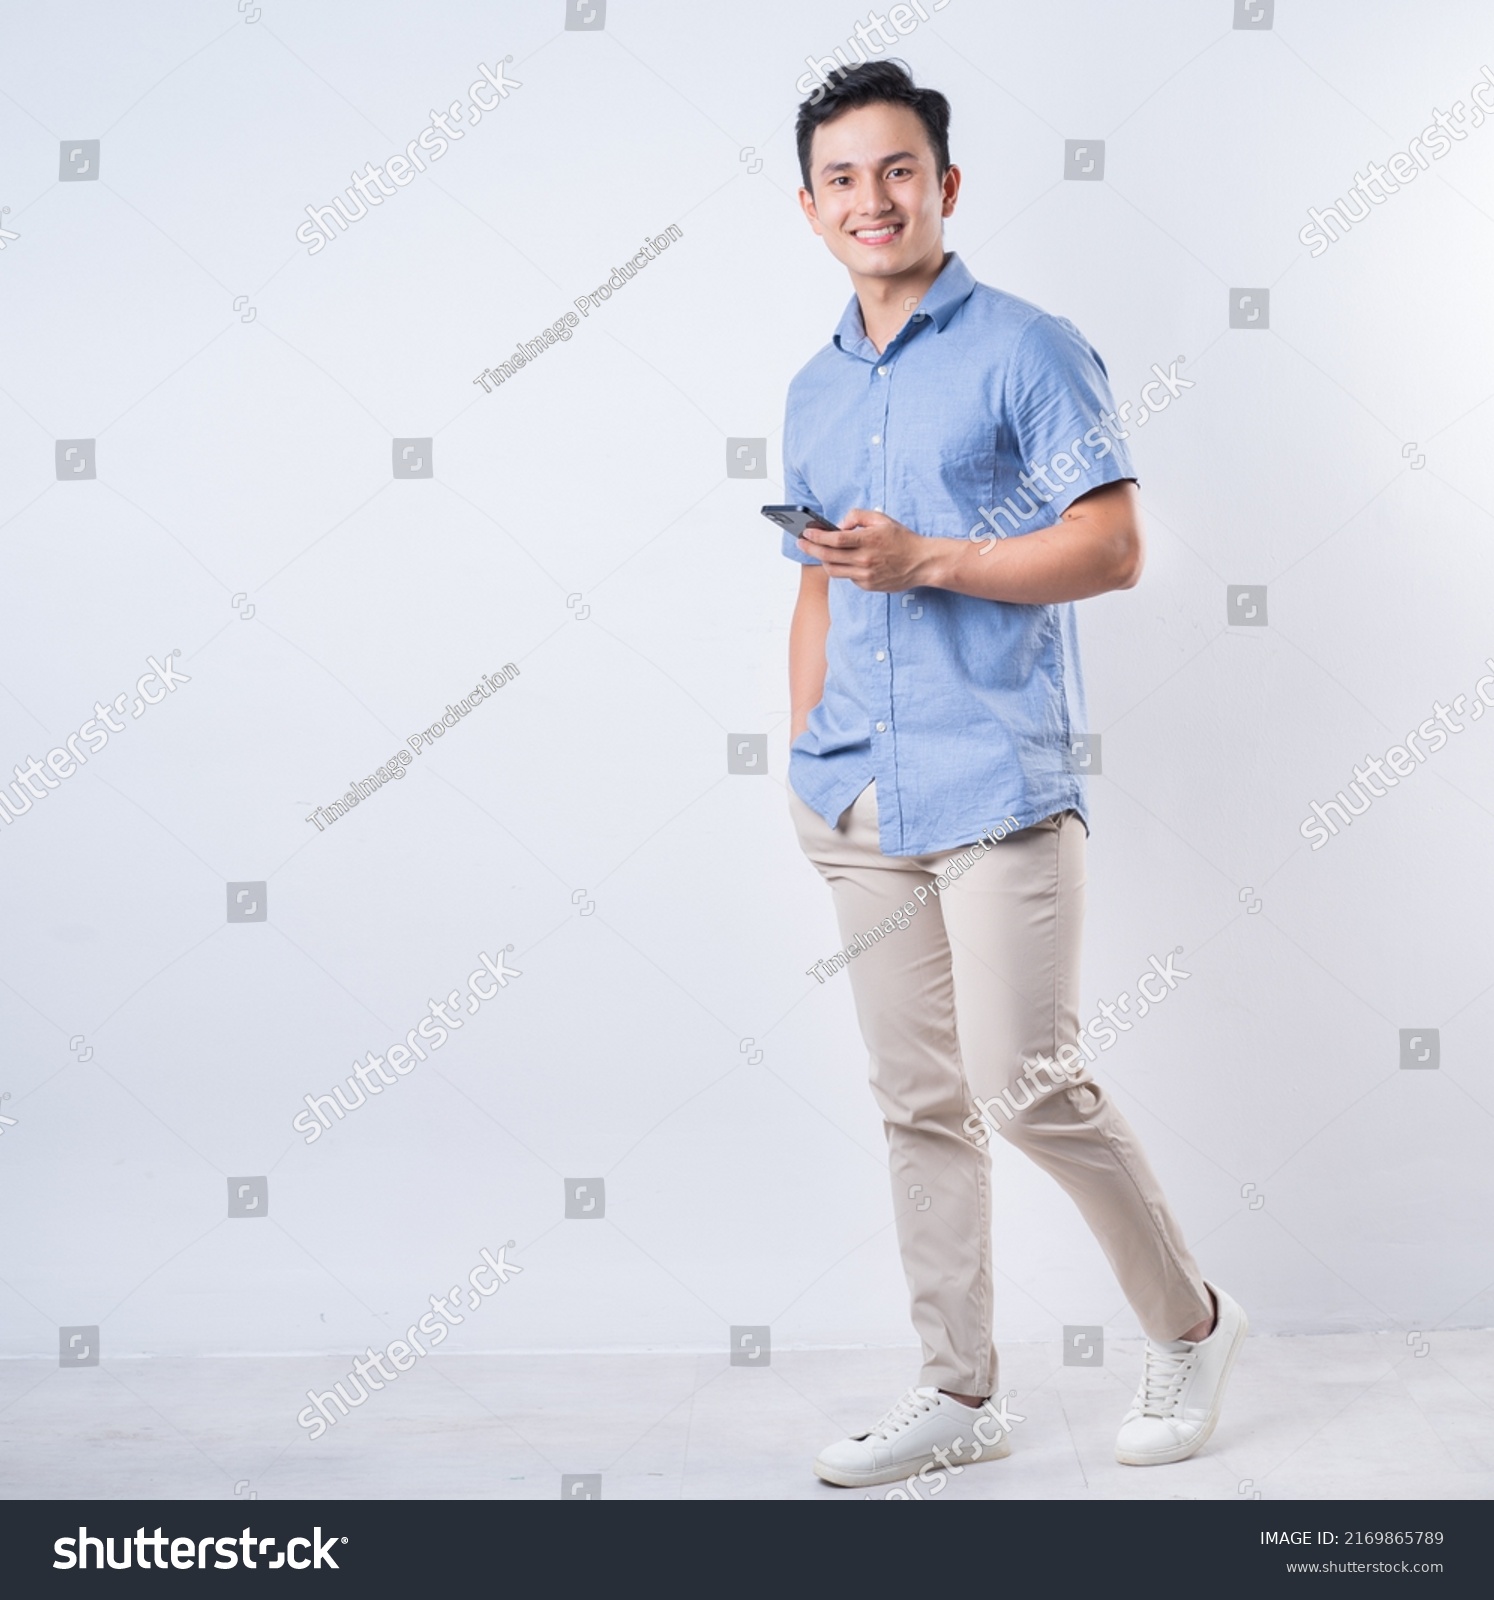 Full length image of young Asian man on white background #2169865789